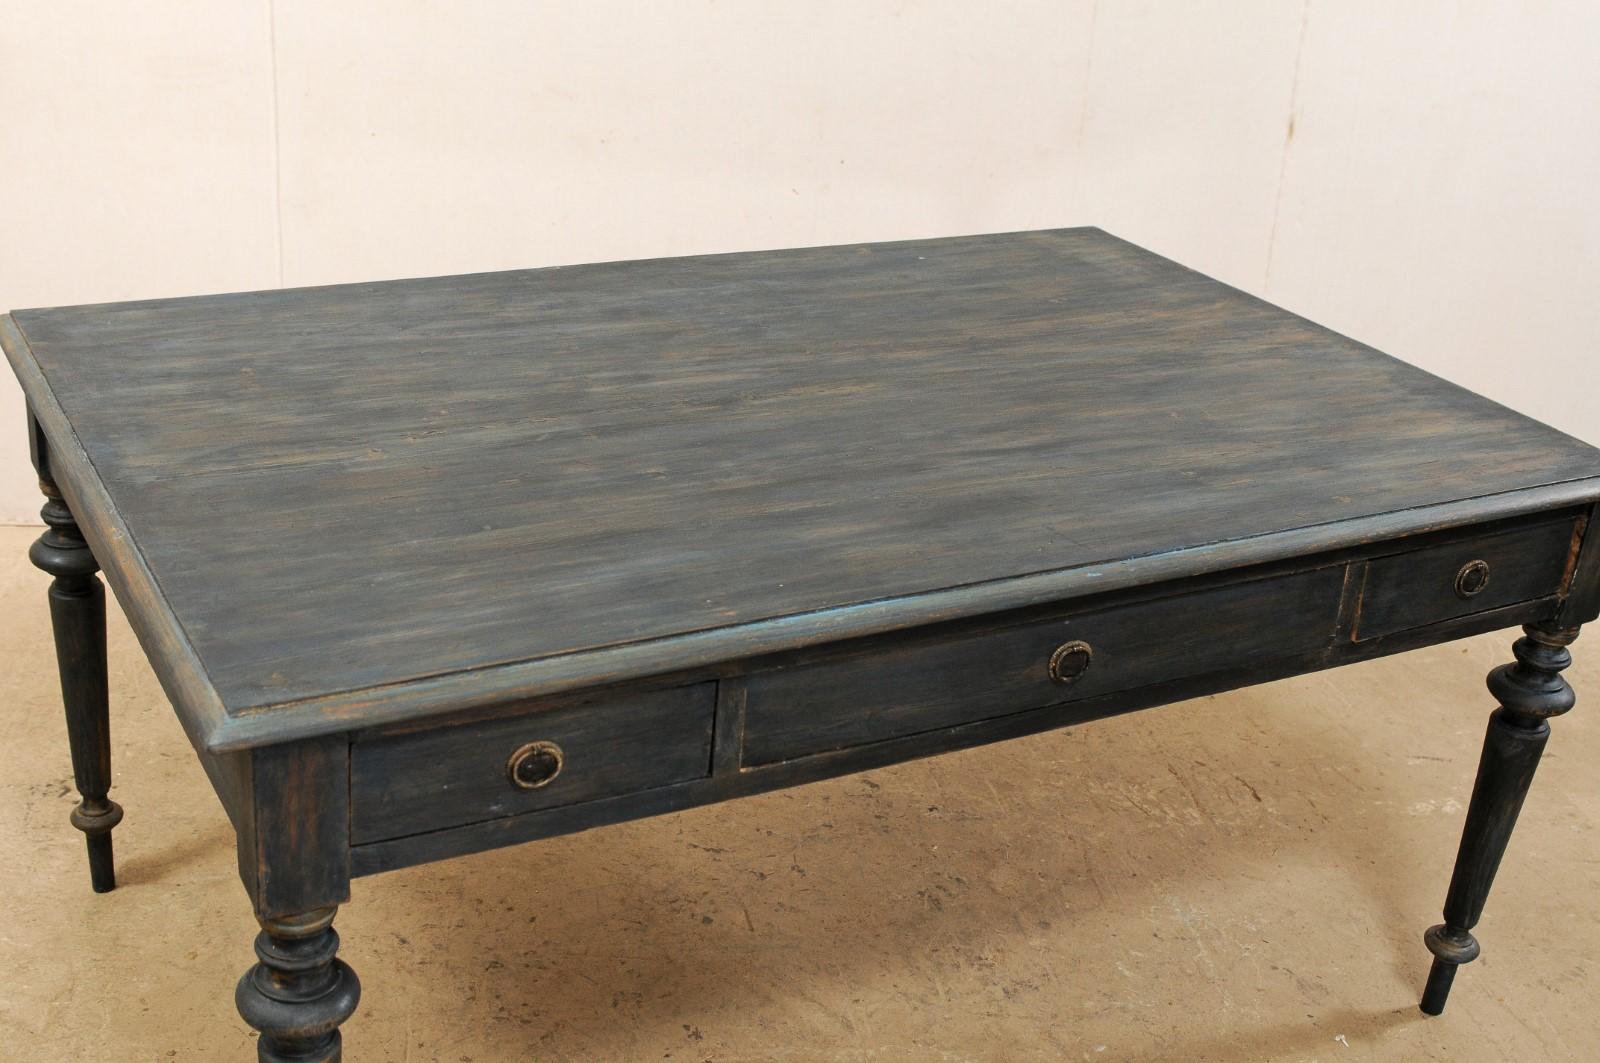 19th Century Swedish Painted Wood Partners Desk with Drawers and Turned Legs